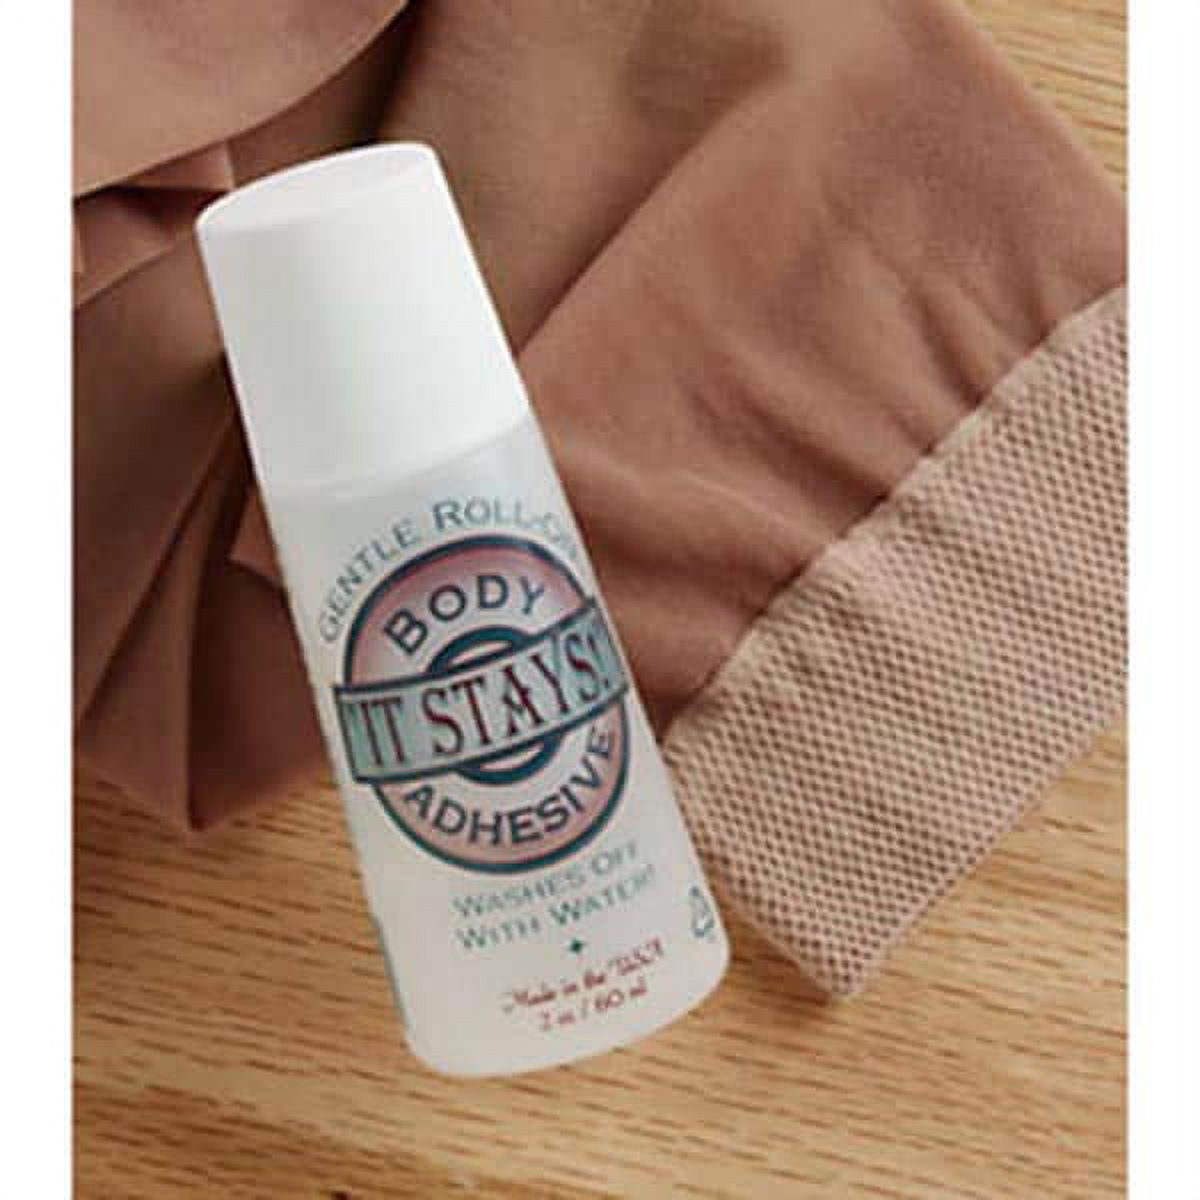 Made in USA - It Stays Roll-On Body Adhesive Applicator for Compression Socks - image 3 of 6